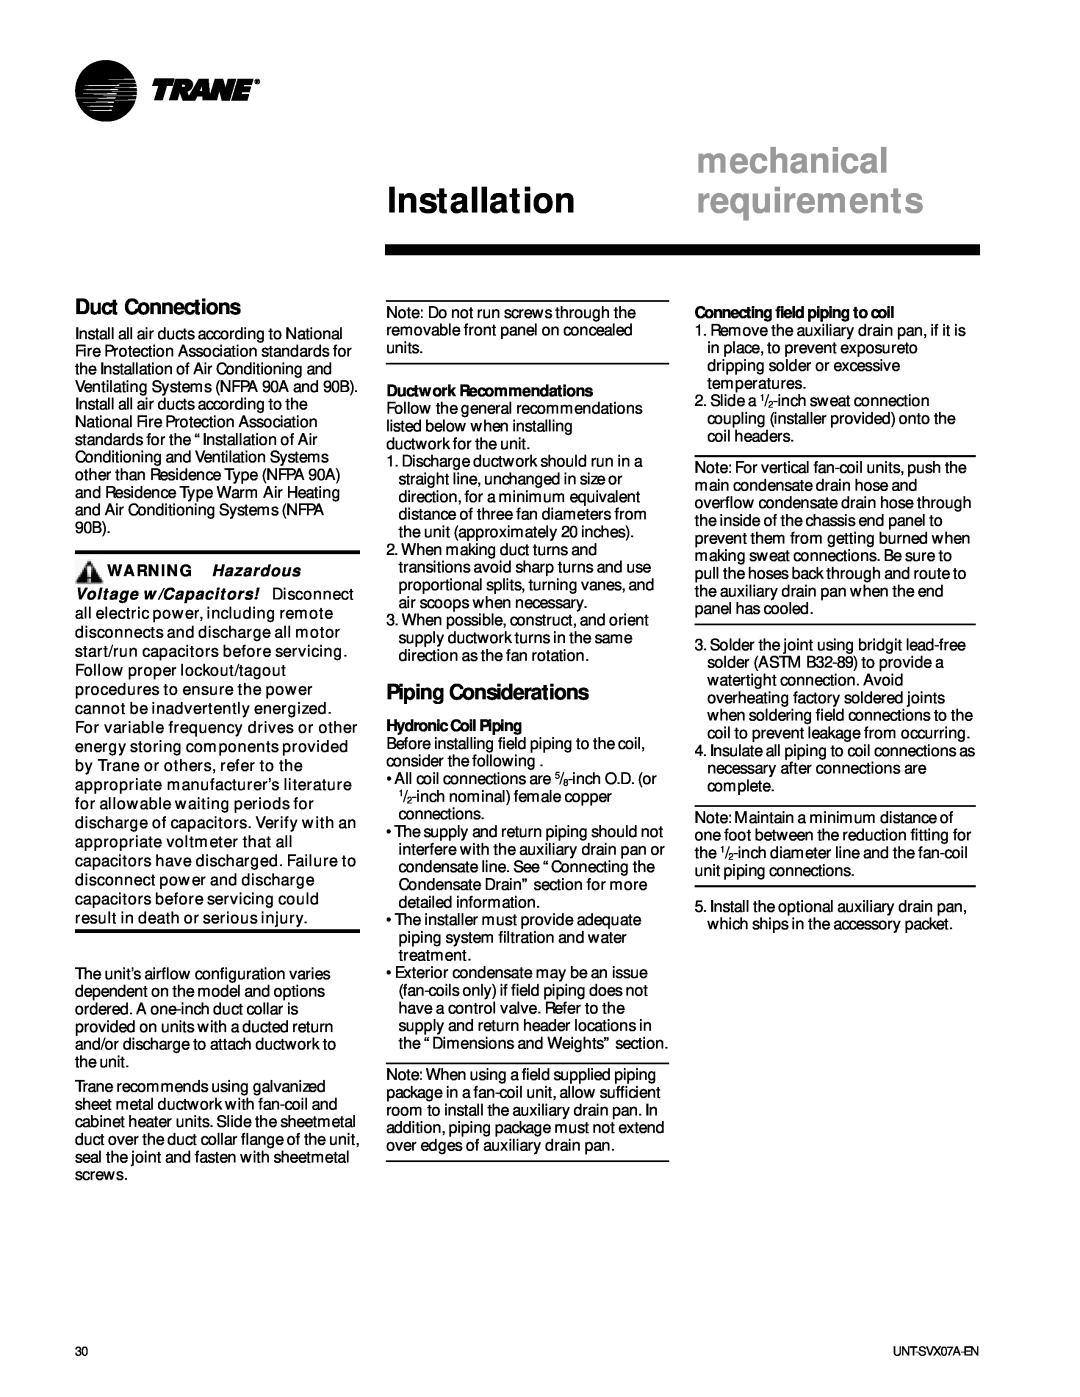 Trane UNT-SVX07A-EN mechanical, Installation requirements, Duct Connections, Piping Considerations, WARNING Hazardous 